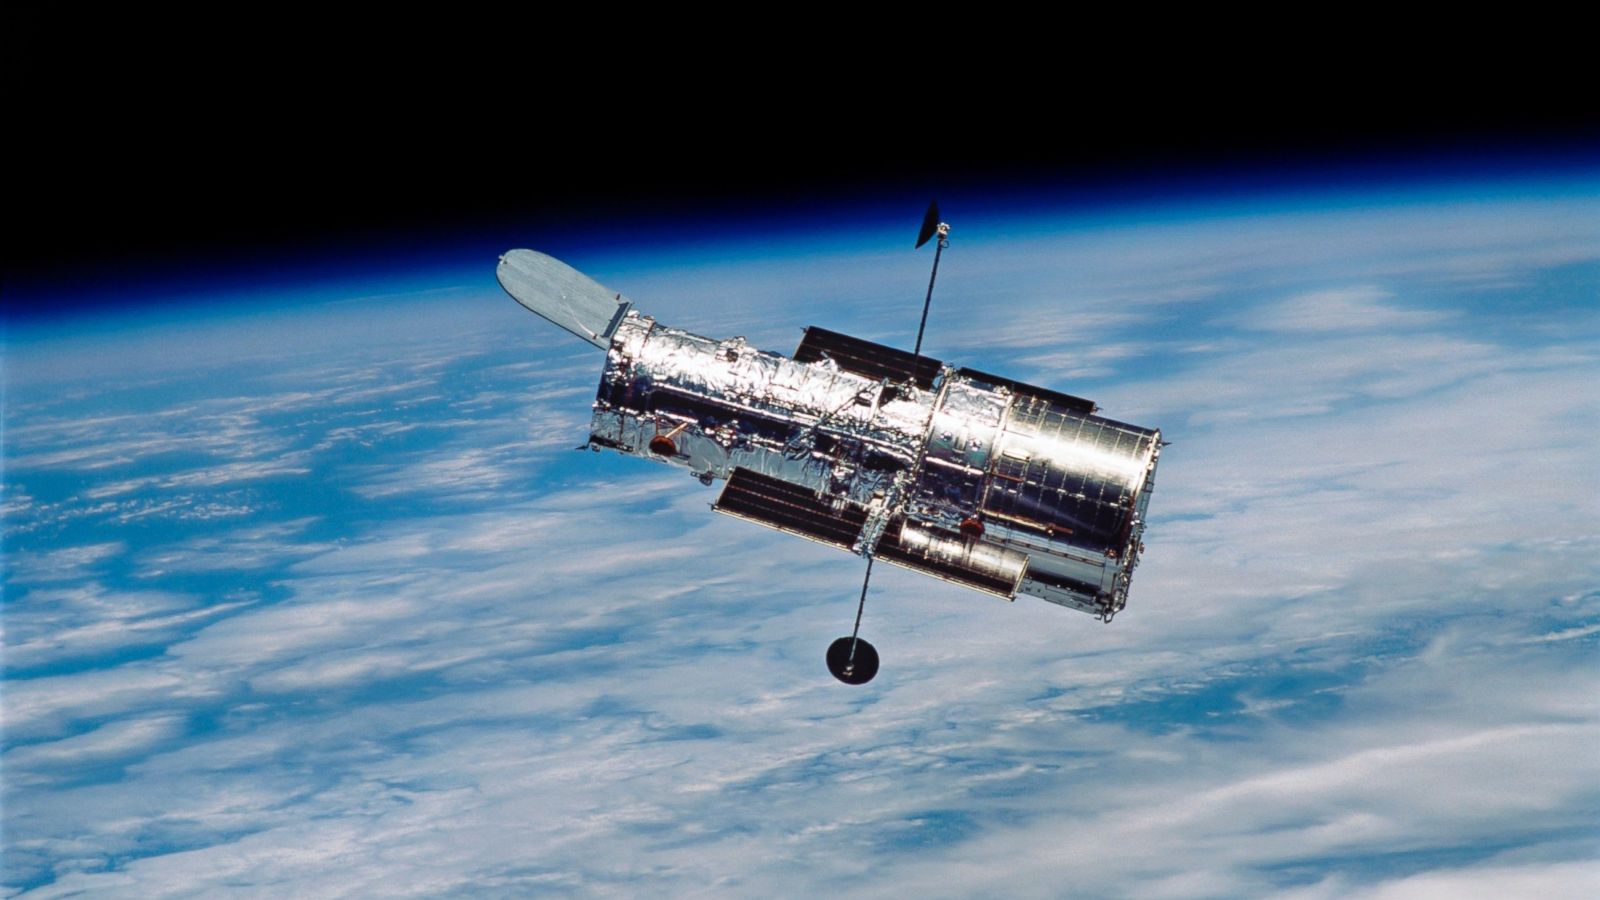 when did hubble launch